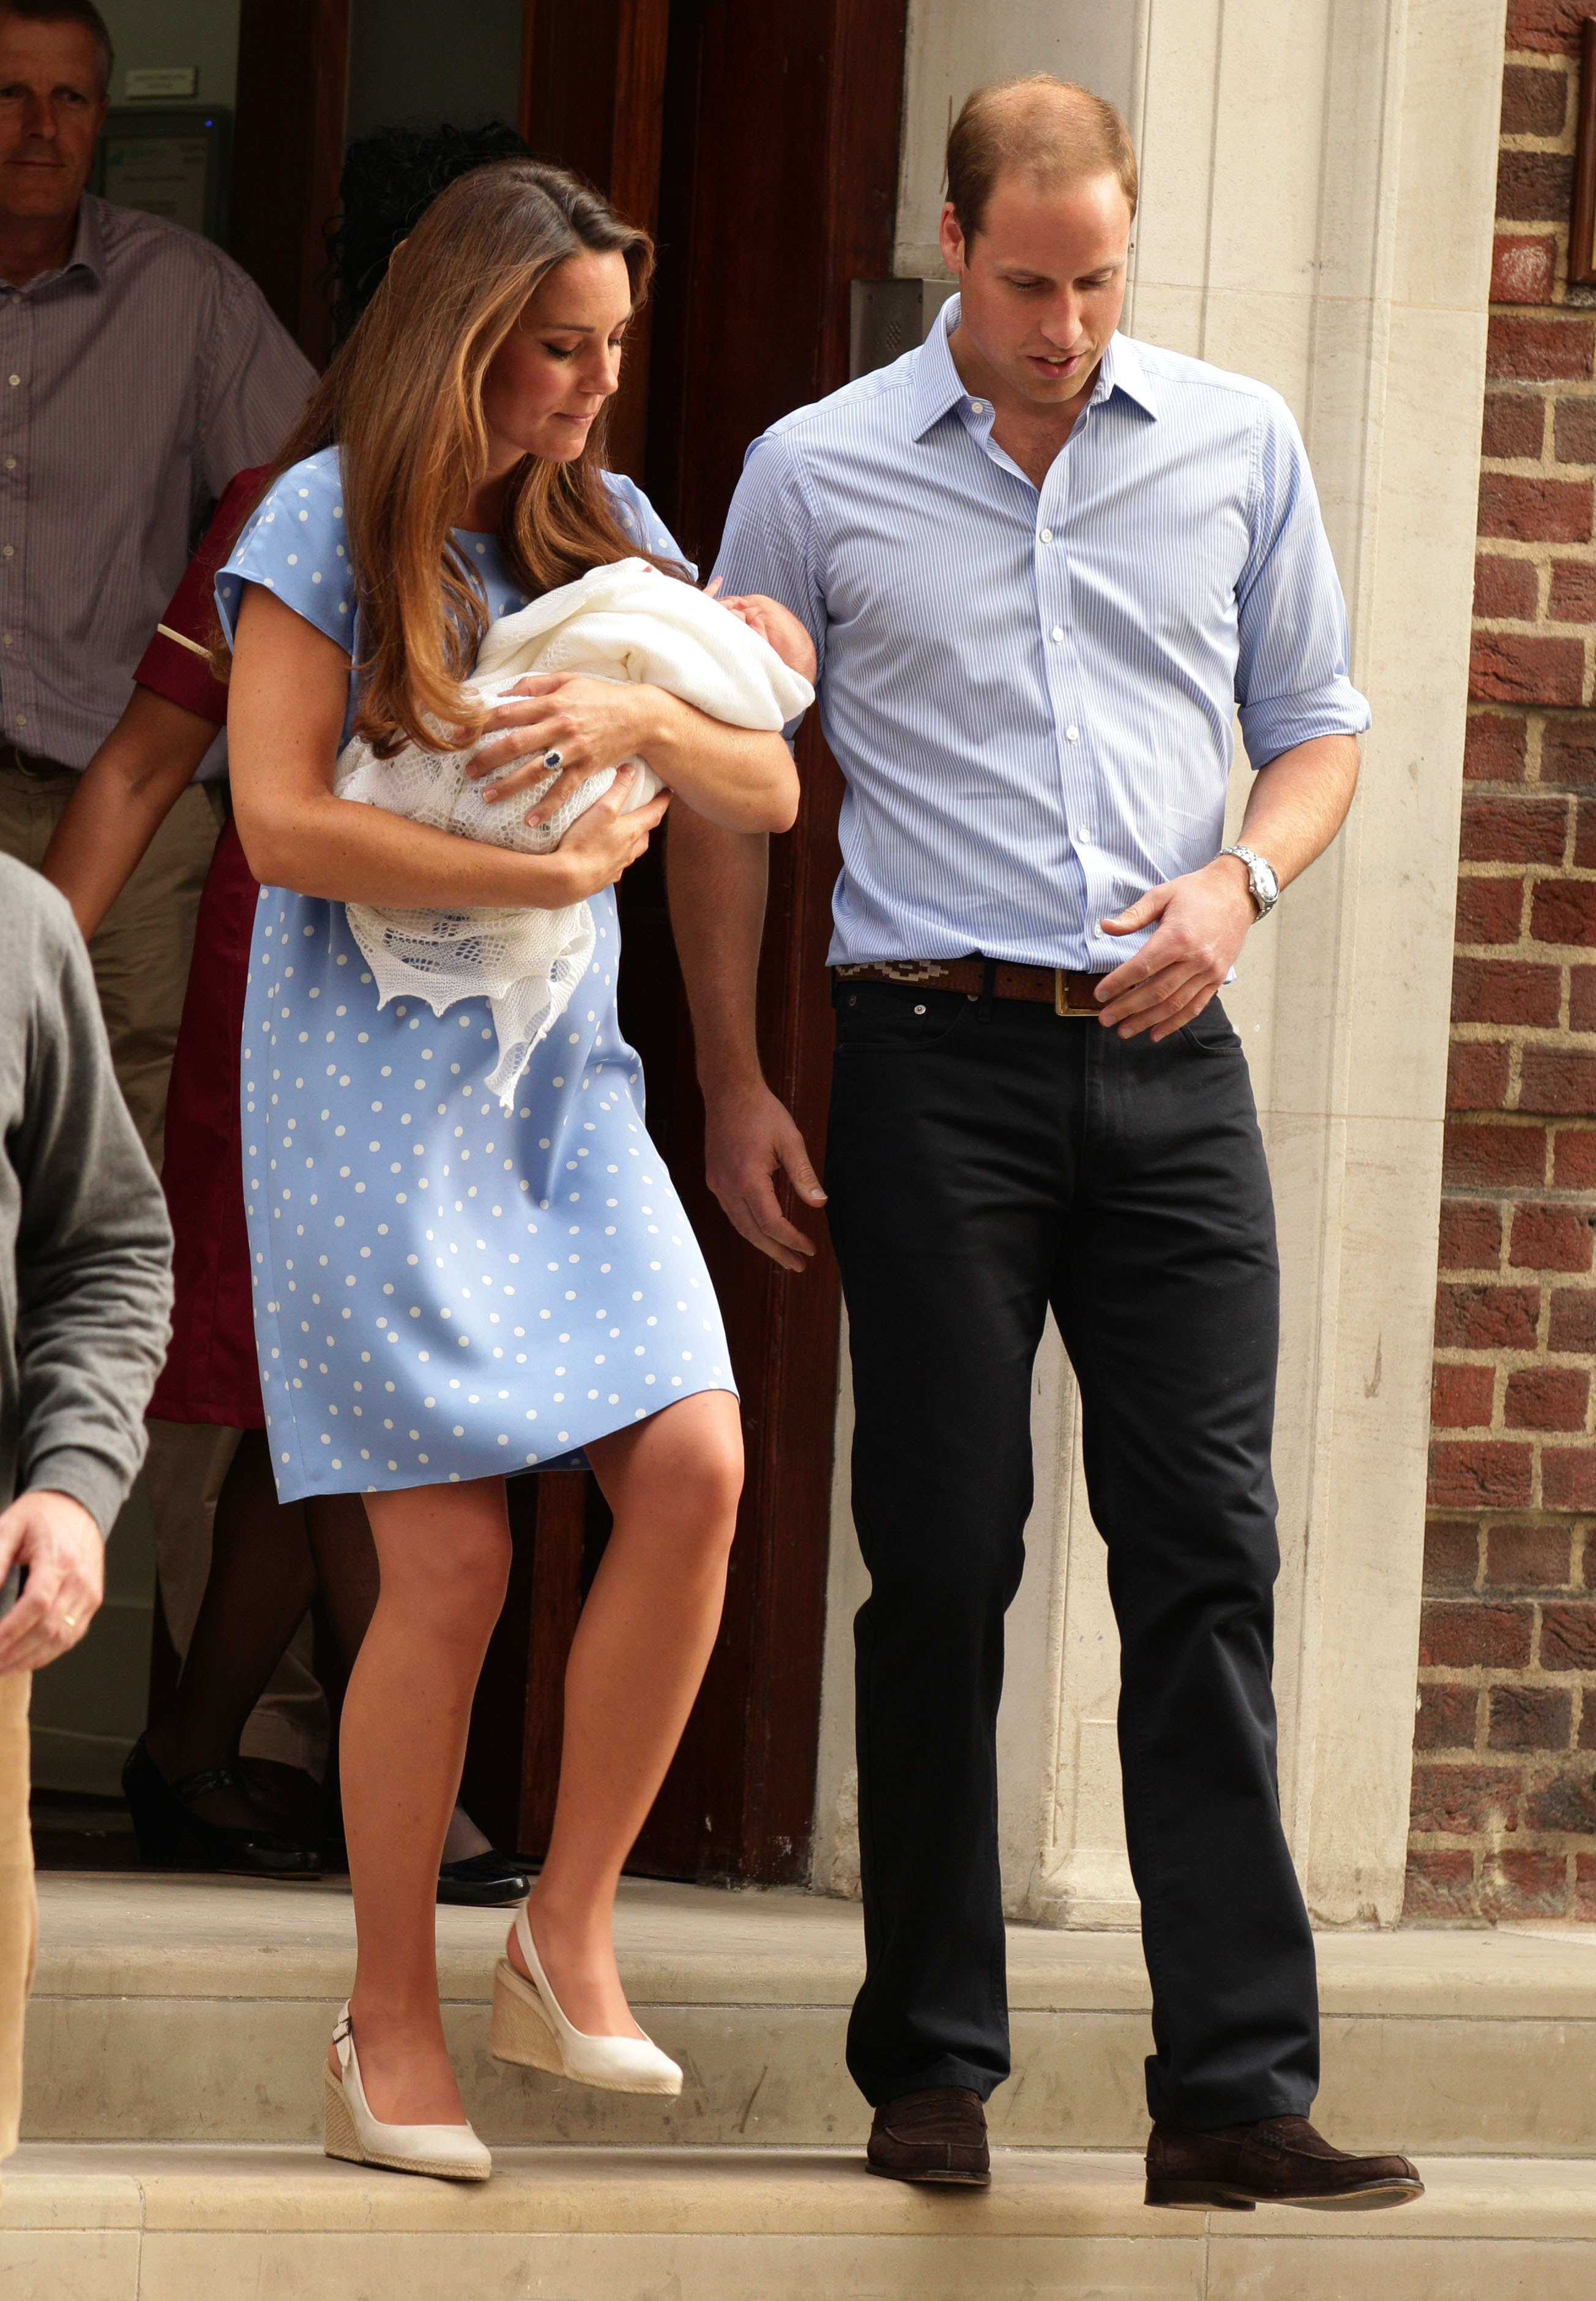 The Duke and Duchess of Cambridge leave the Lindo Wing of St Mary's Hospital in London, with their newborn son, Prince George of Cambridge